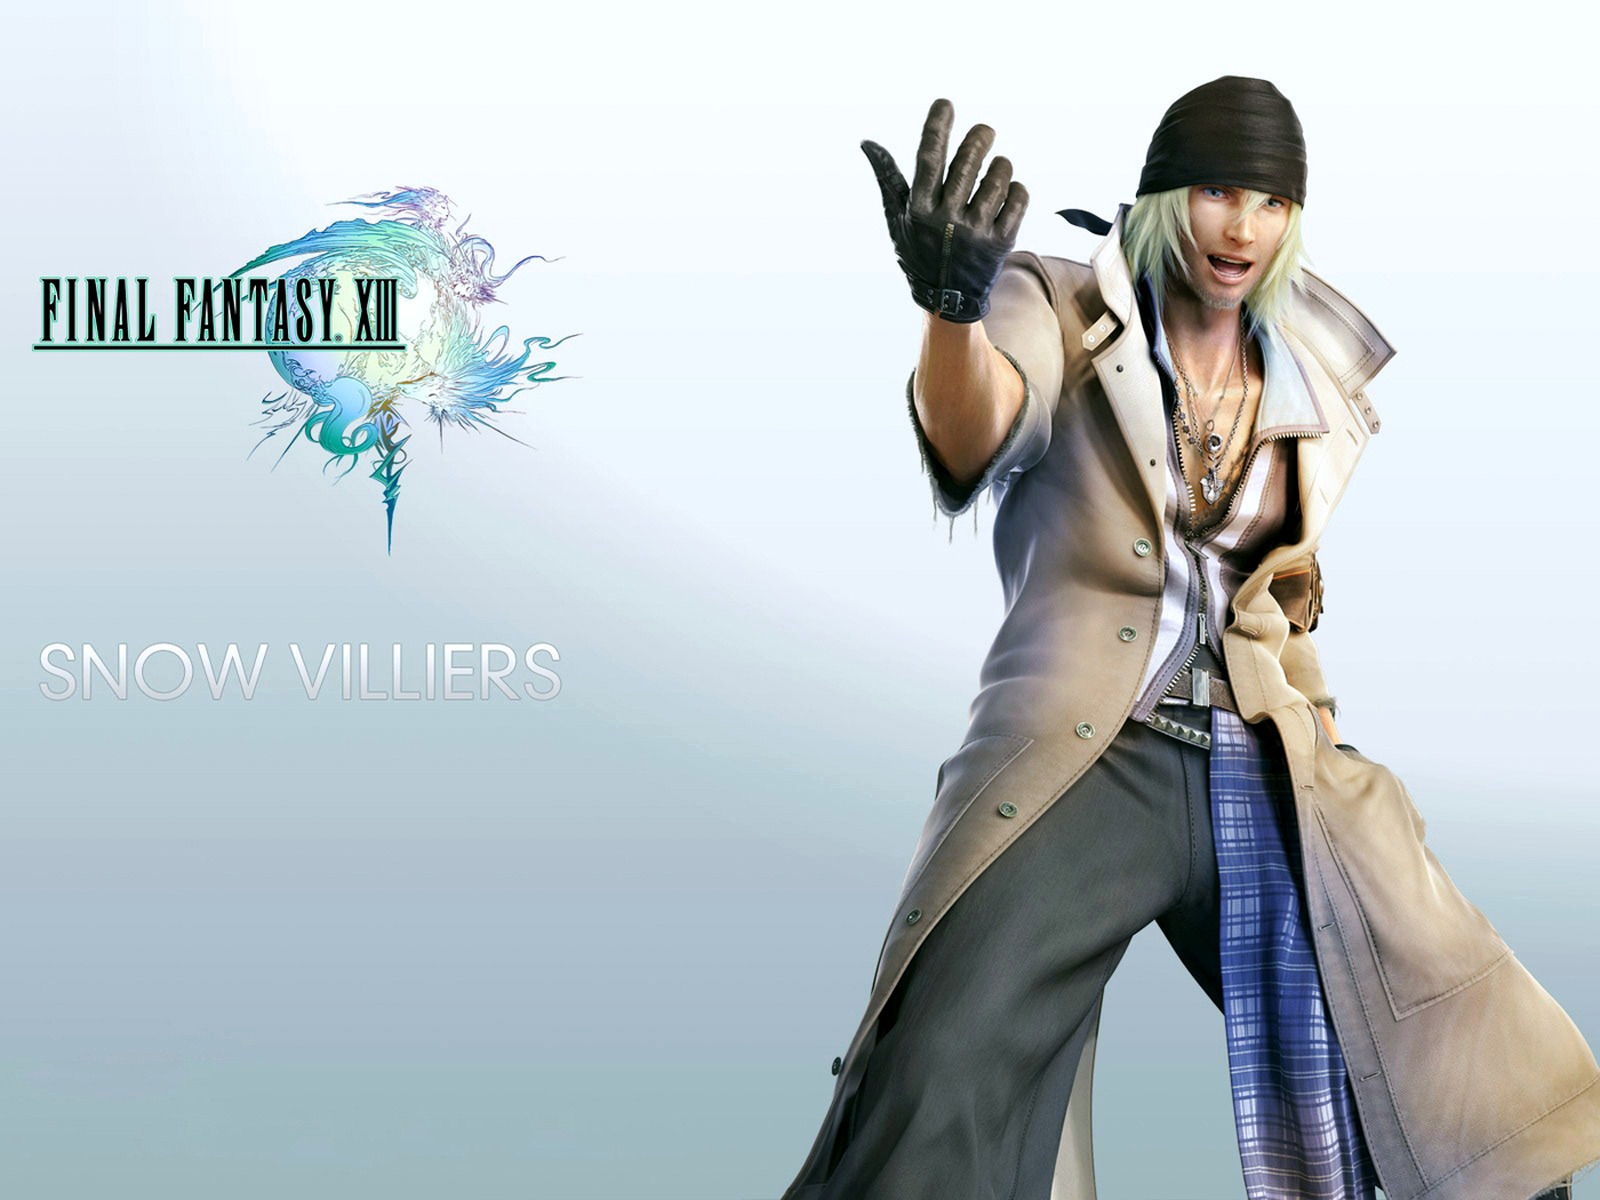 Final Fantasy XIII Snow Villiers for 1600 x 1200 resolution